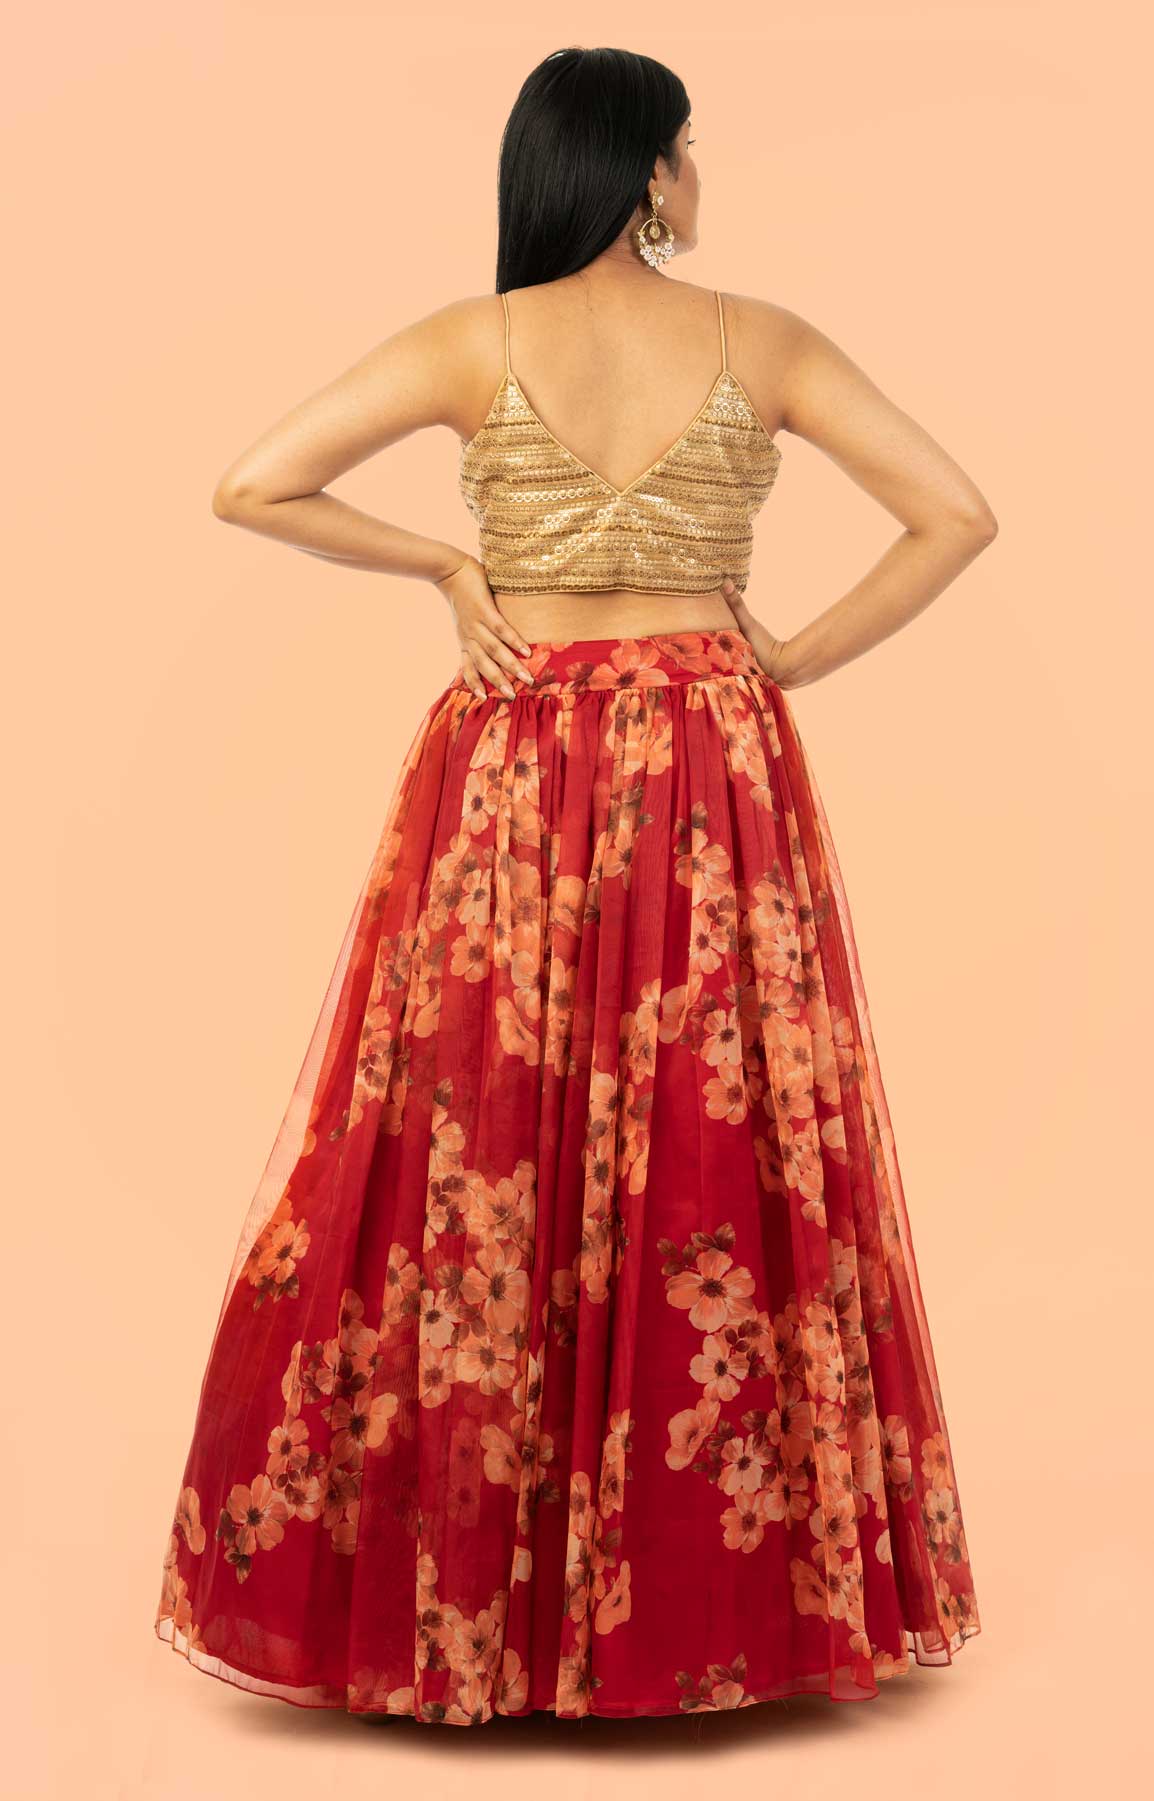 Poppy Red Lehenga In Mustard Floral Motif Print Matched With Golden Embroidered Blouse – Viraaya By Ushnakmals